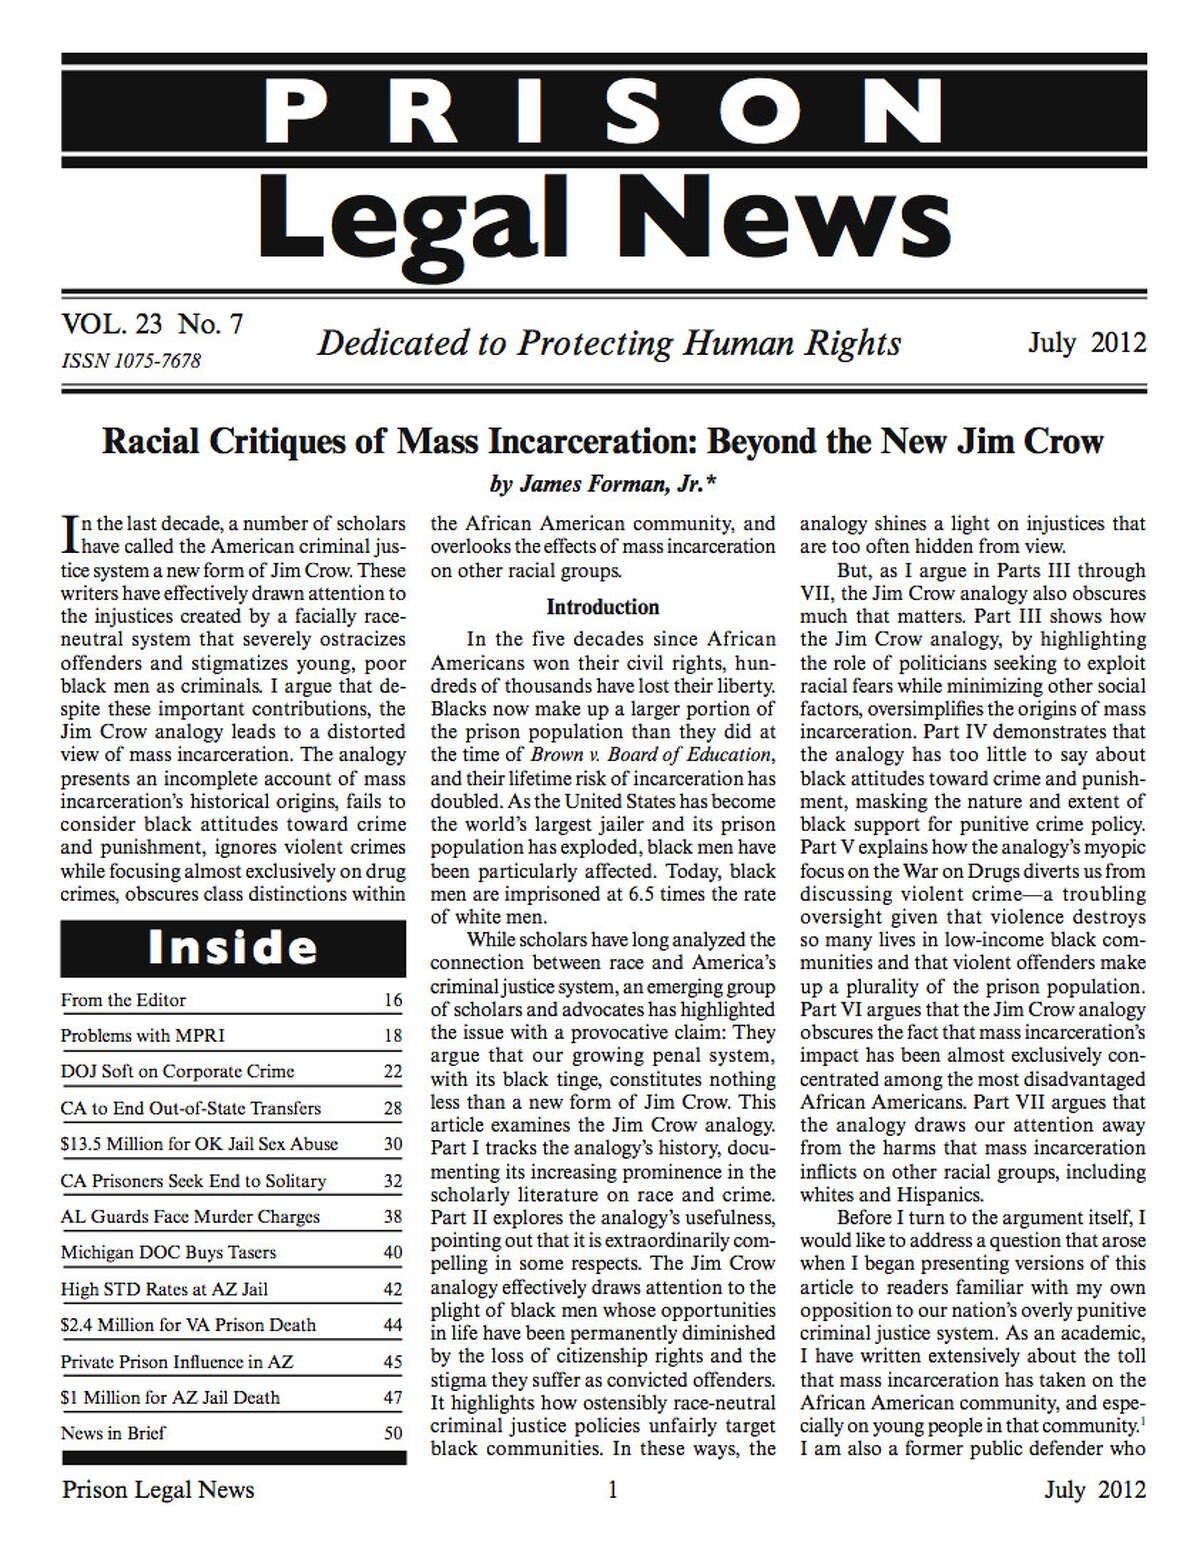 The July 2012 issue of Prison Legal News.